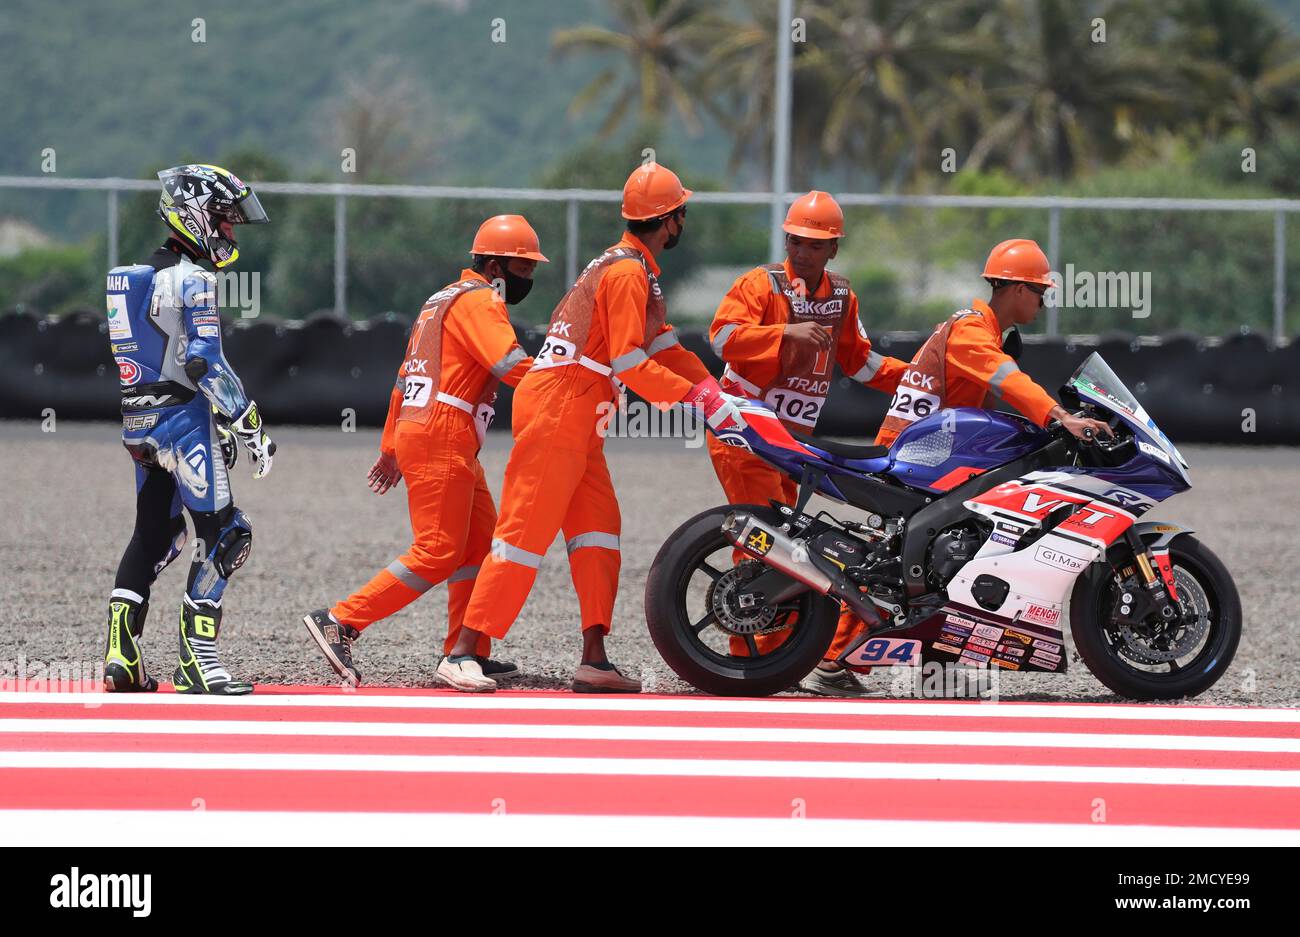 Team VFT Racing rider Federico Caricasulo of Italy, left, helped off the track after engine trouble during the Supersport world free practice 1 at Mandalika International Circuit in Mandalika, Lombok Island, Indonesia,